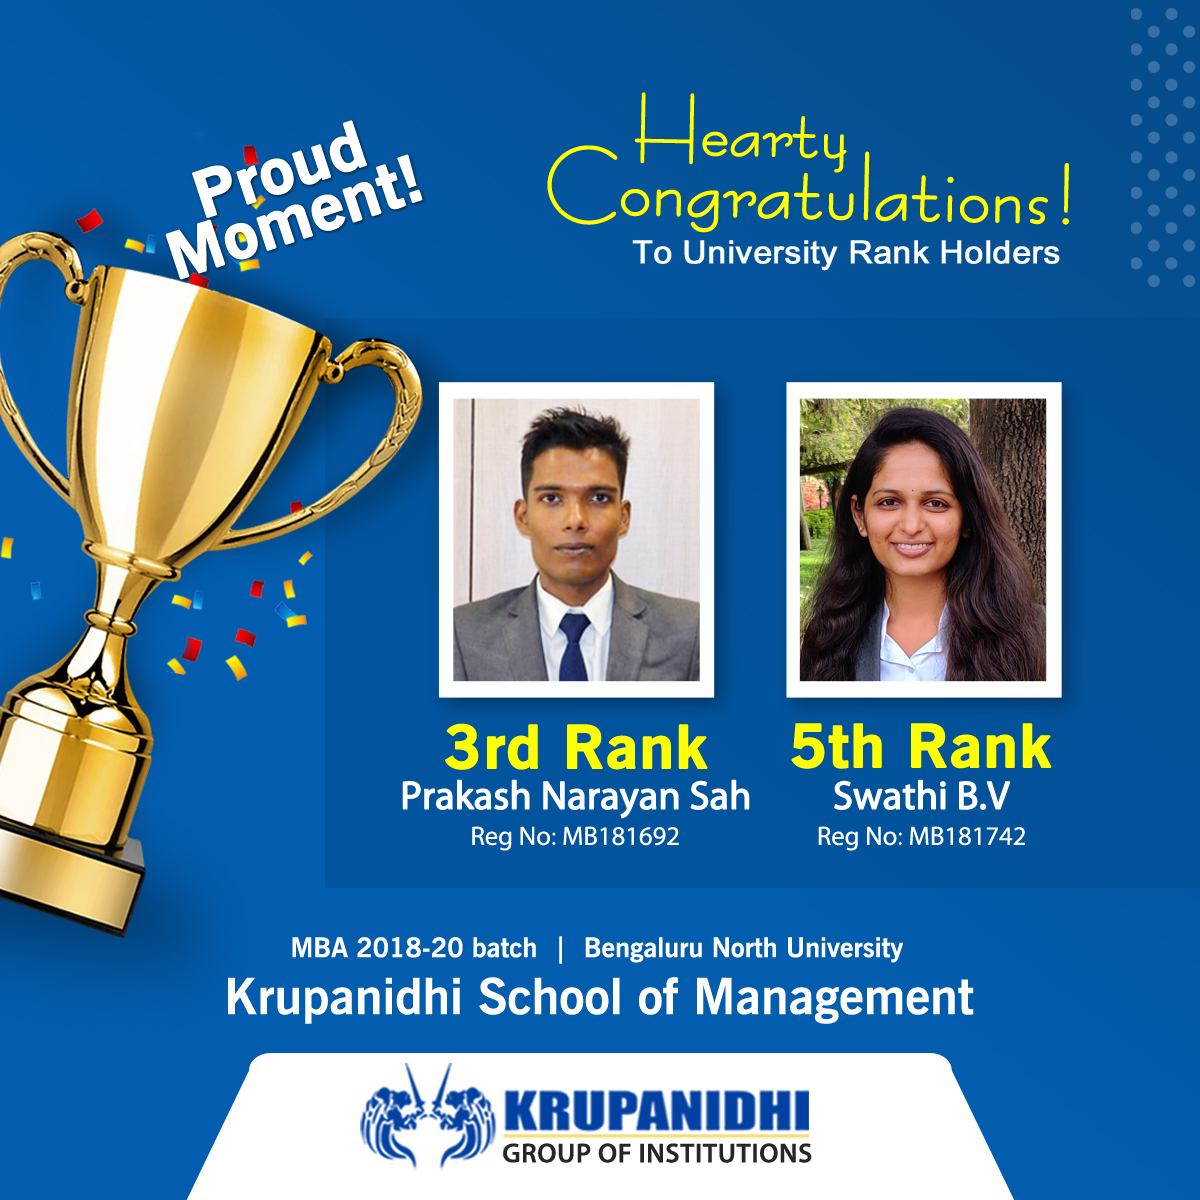 Hearty Congratulations to our MBA Students of 2018-20 batch for securing University Ranks in Bengaluru North University final Exams.
We wish them all the best for their future.